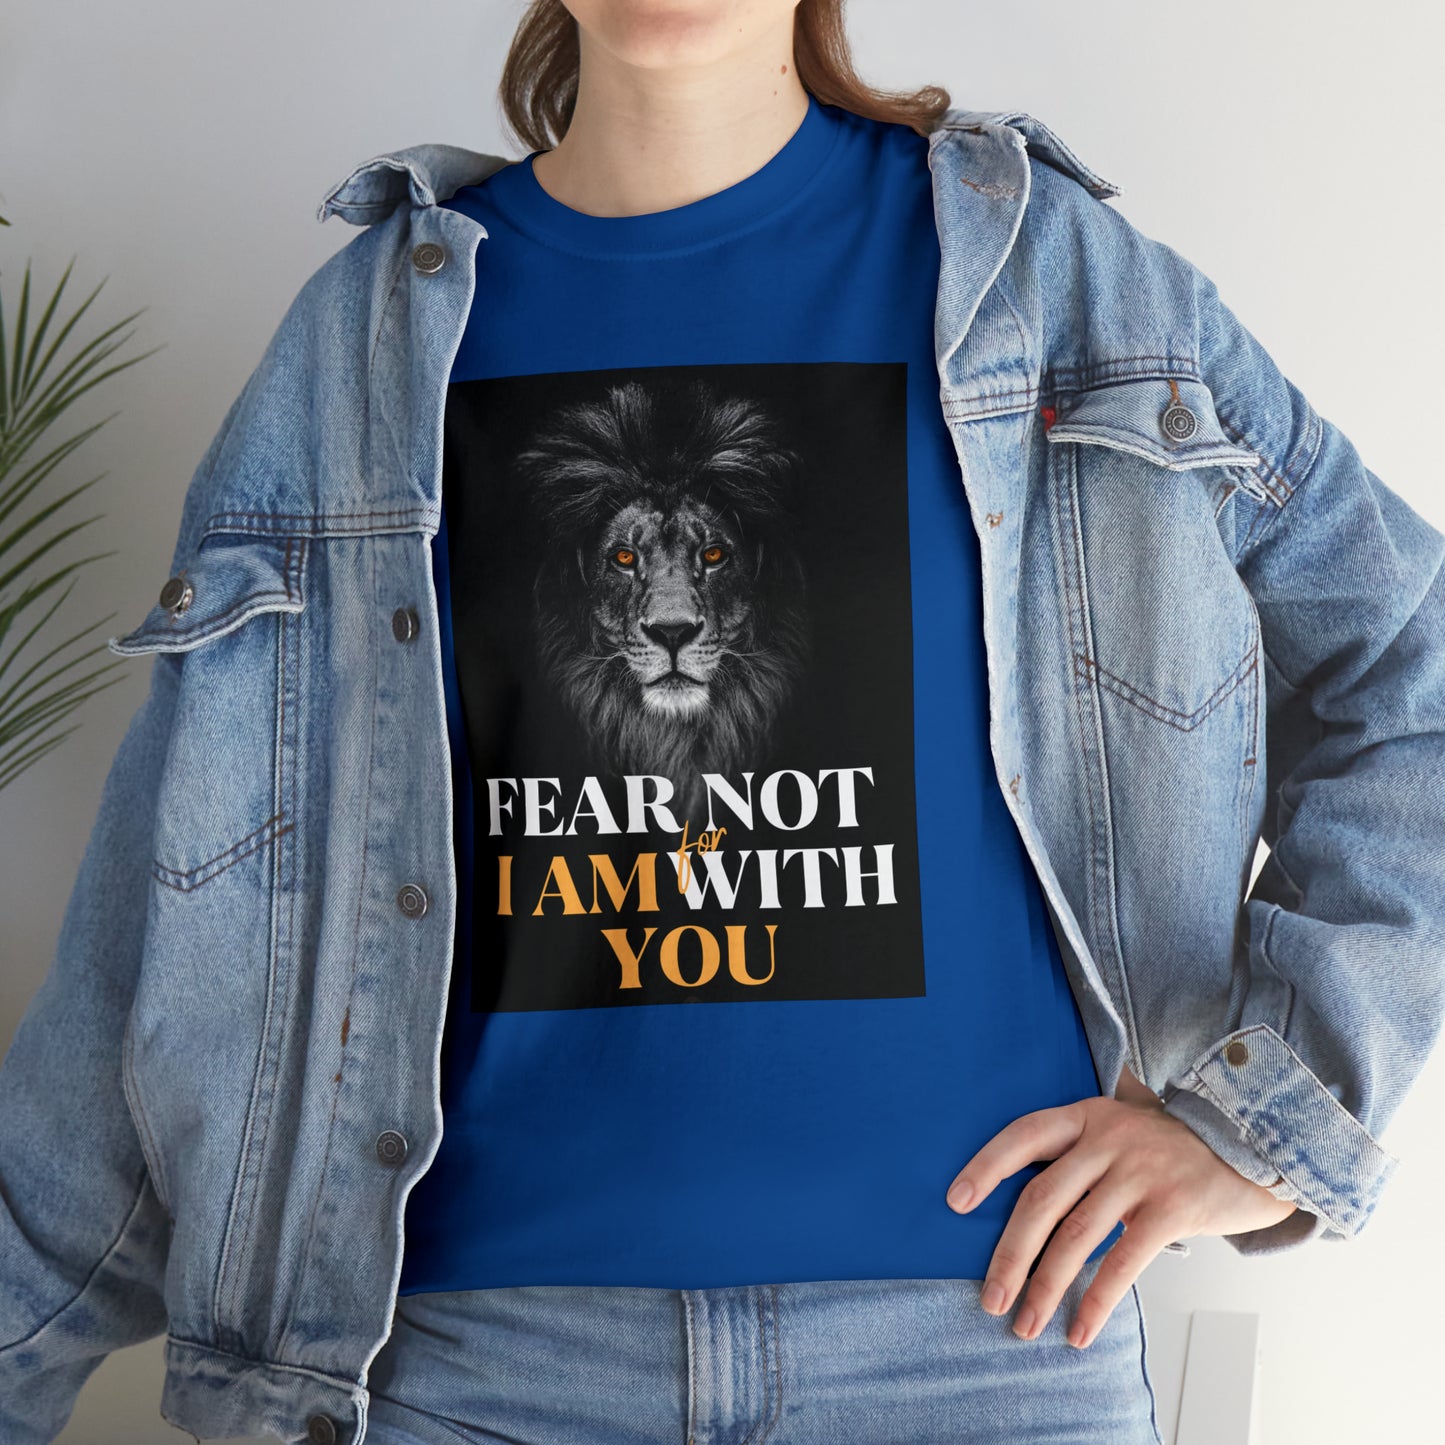 FEAR NOT FOR I AM WITH YOU